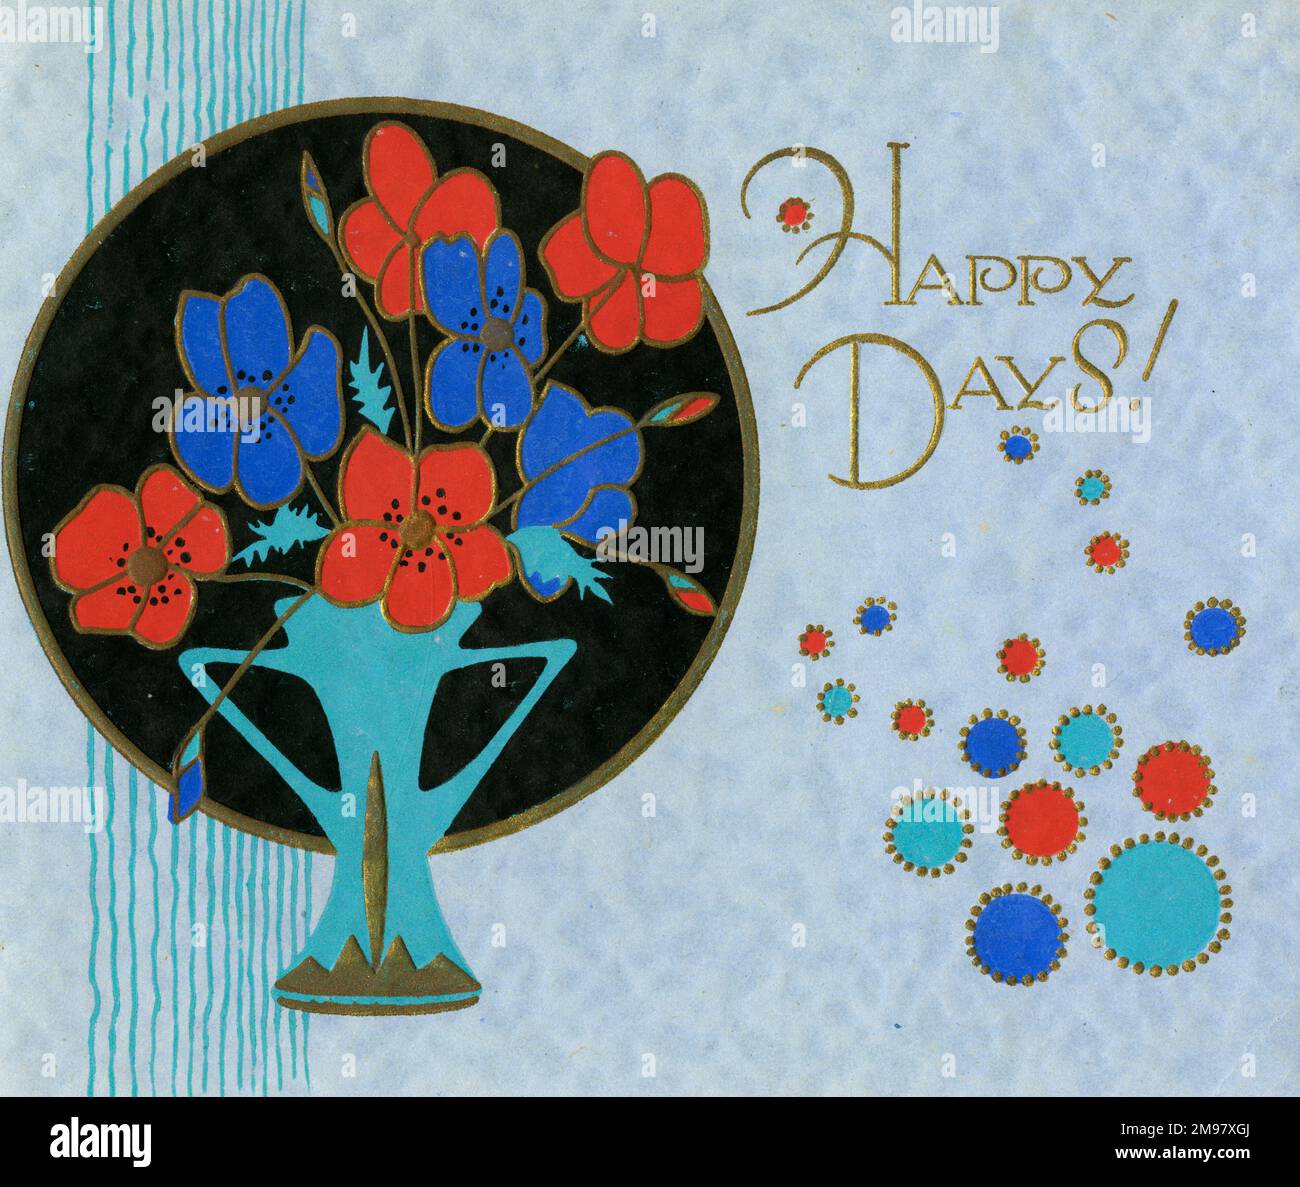 Greetings Card - Happy Days ! Stock Photo